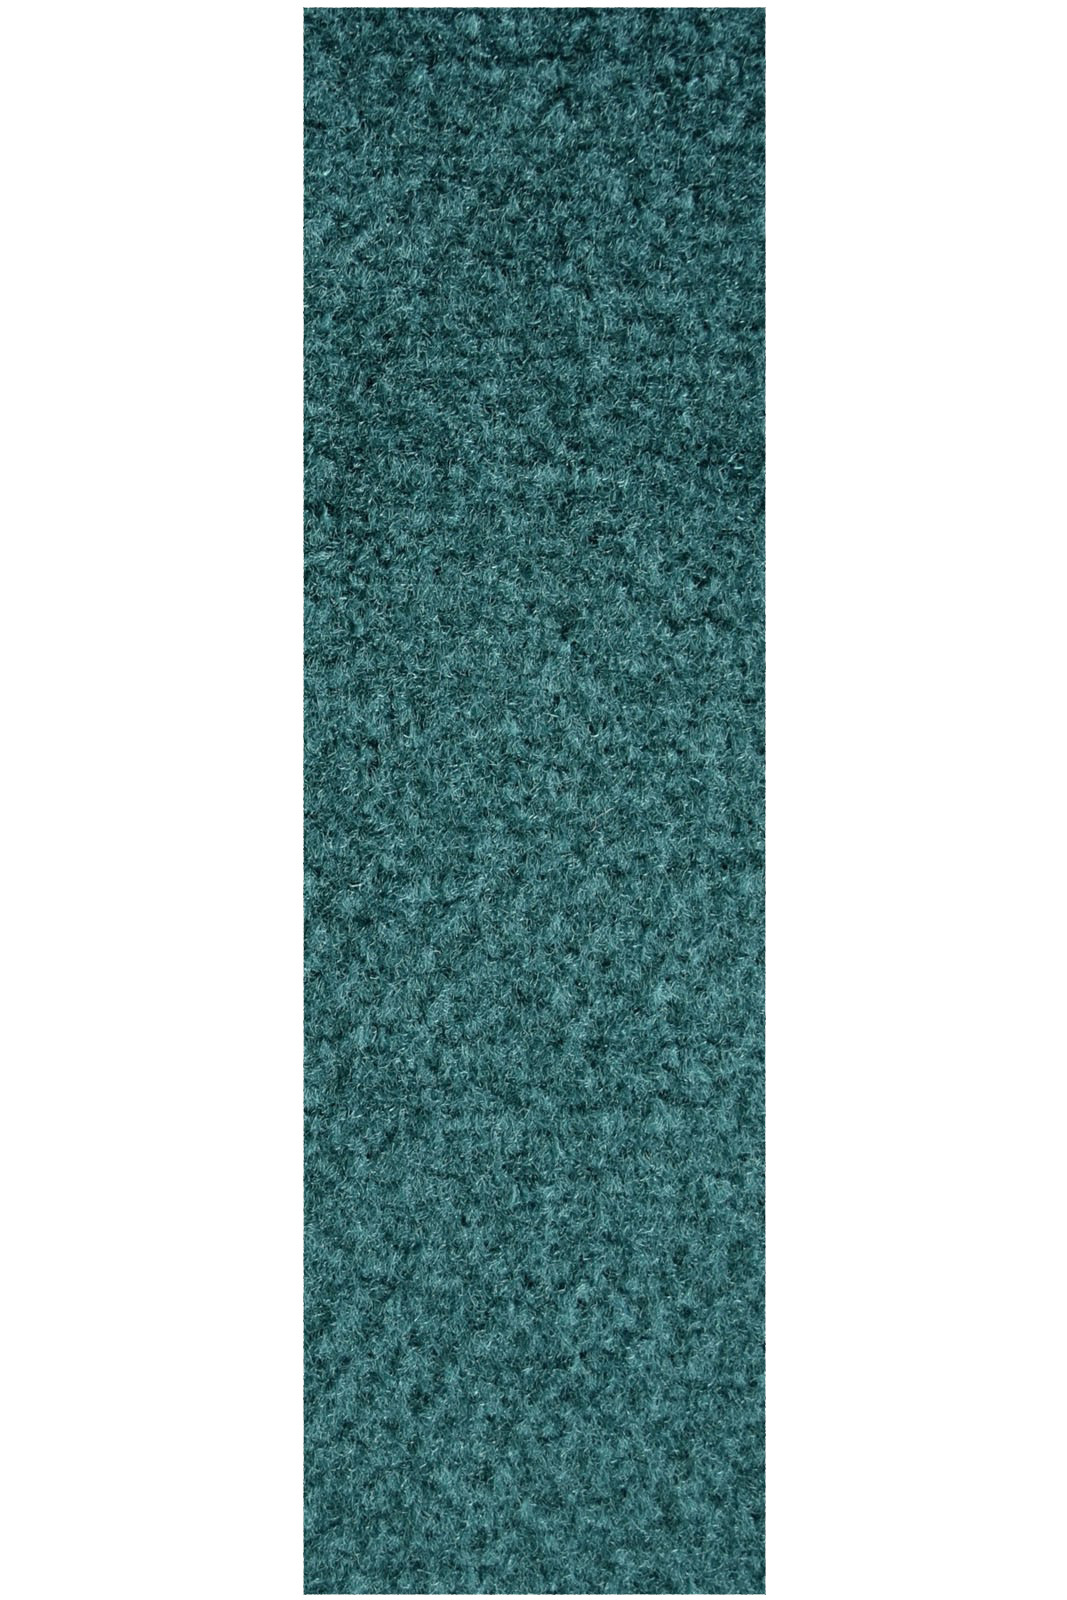 Commercial Indoor/Outdoor Teal Custom Size Runner 4' x 34' - Area Rug with Rubber Marine Backing for Patio, Porch, Deck, Boat, Basement or Garage with Premium Bound Polyester Edges - image 1 of 1